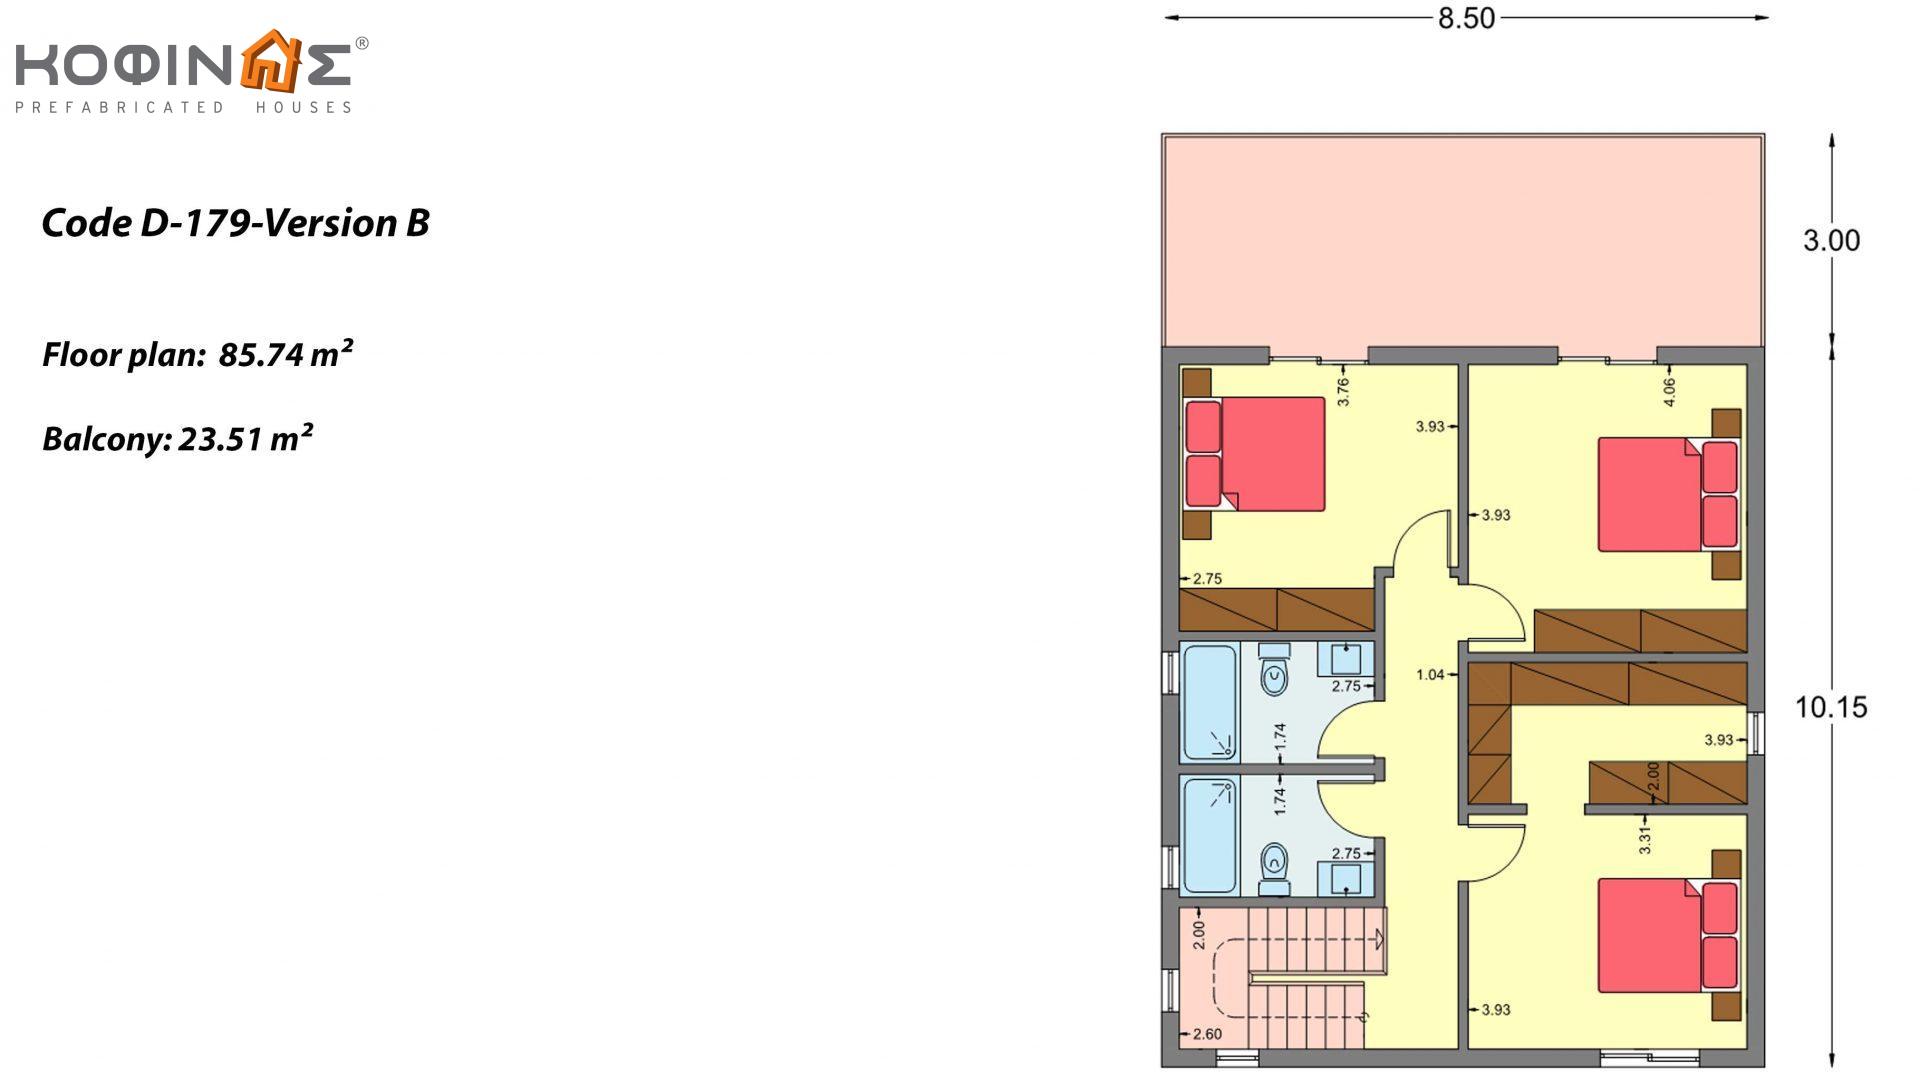 2-story house D-179, total surface of 179.38 m², +Garage 19.42 τ.μ. (=198.80 m²), covered roofed areas 30.90 m², Balconies 23.51 m²